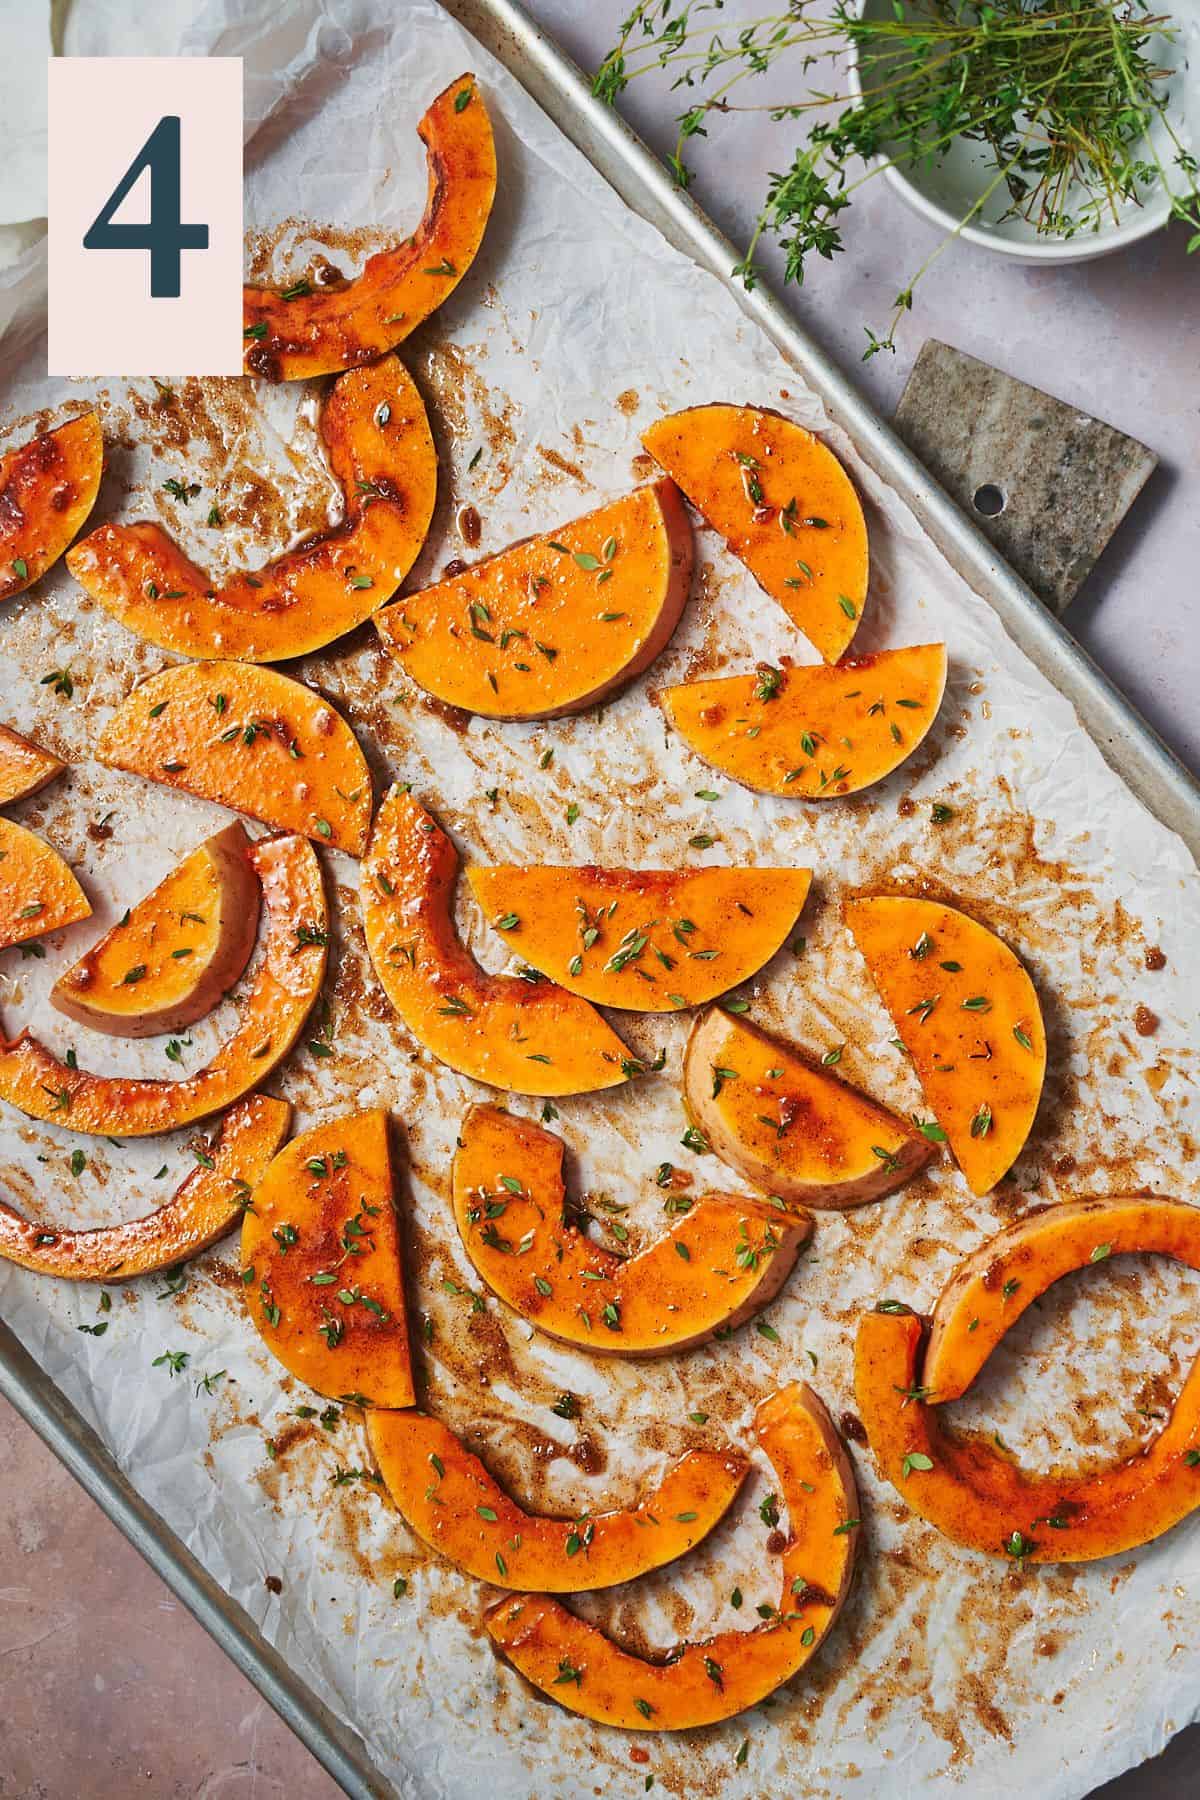 seasoned butternut squash pieces on a parchment lined baking sheet with thyme and other warm spices.